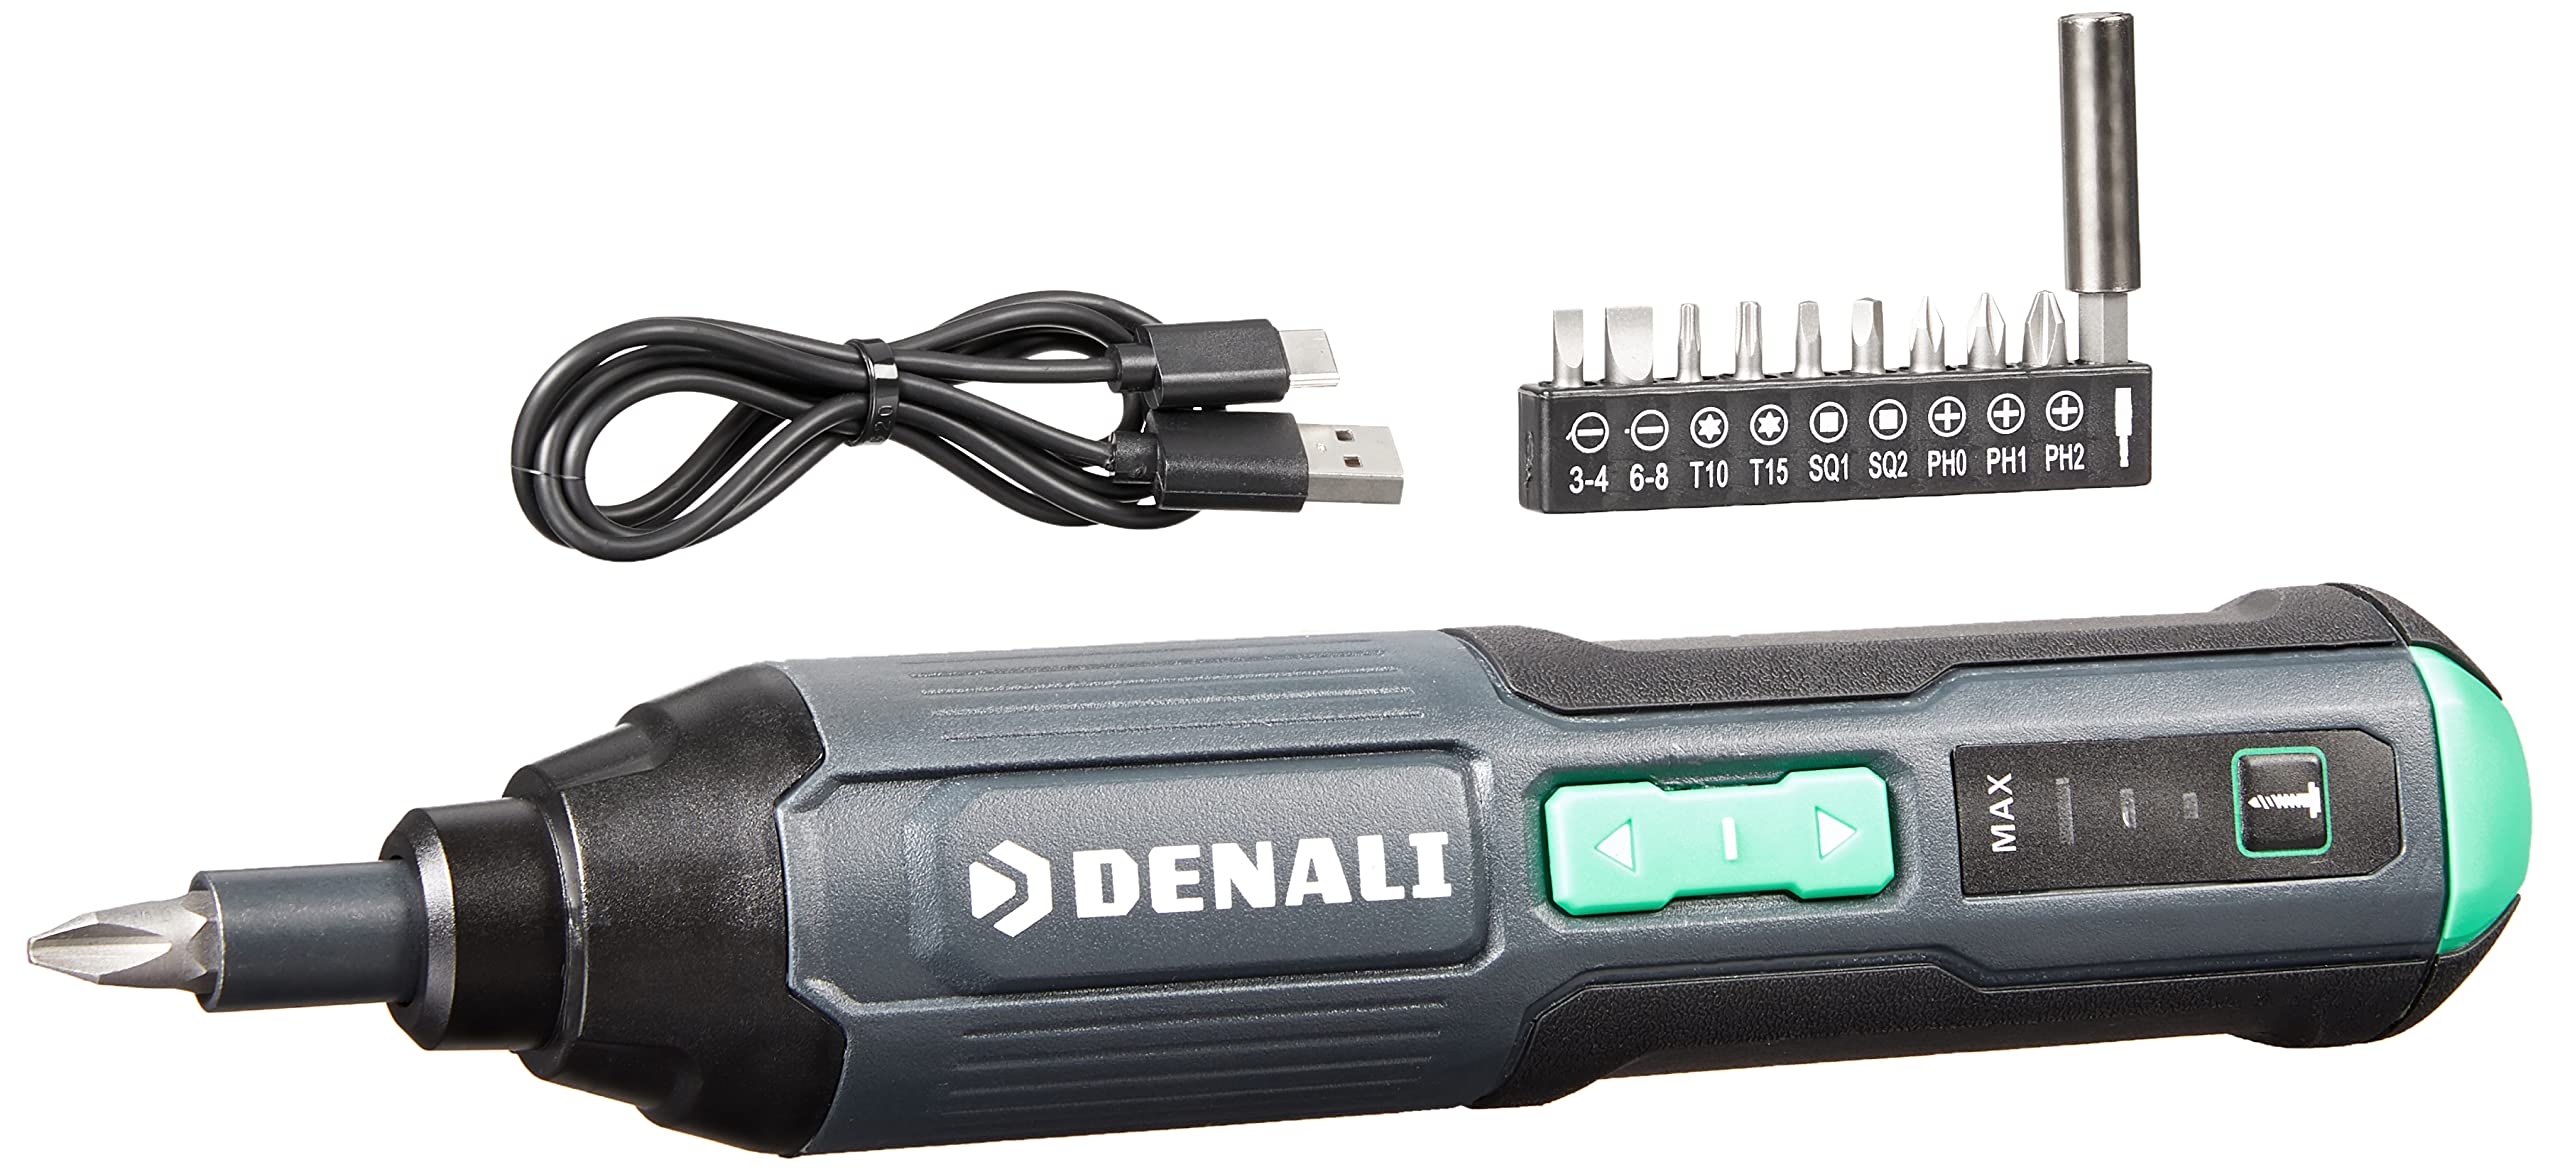 Amazon Brand - Denali by SKIL 4V Cordless Stick Screwdriver with 10-Piece Bit Set and USB Cable並行輸入品